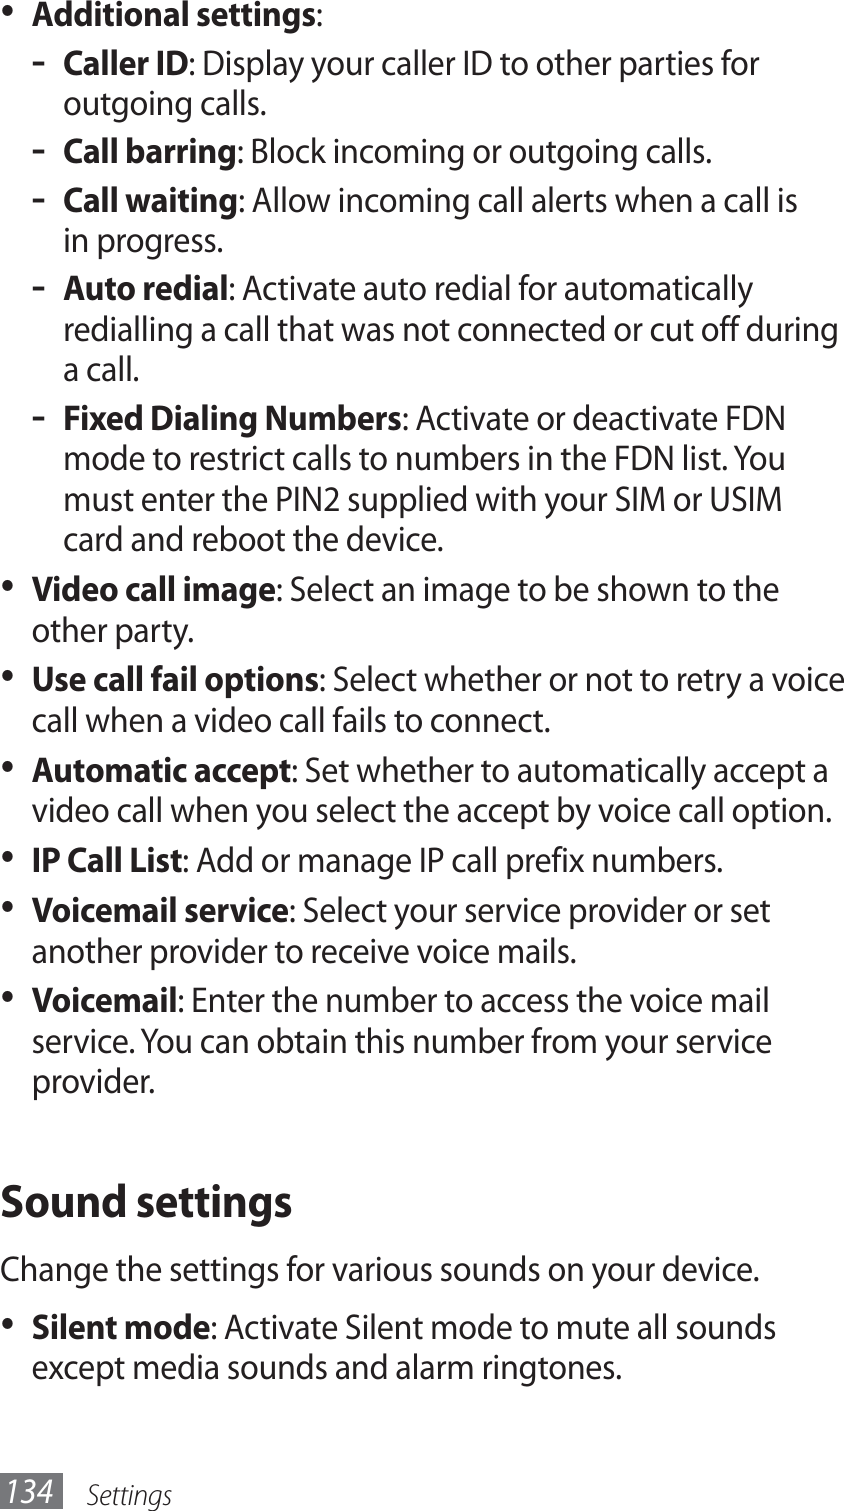 Settings134Additional settings•  :Caller ID - : Display your caller ID to other parties for outgoing calls.Call barring - : Block incoming or outgoing calls.Call waiting - : Allow incoming call alerts when a call is in progress.Auto redial - : Activate auto redial for automatically redialling a call that was not connected or cut off during a call.Fixed Dialing Numbers - : Activate or deactivate FDN mode to restrict calls to numbers in the FDN list. You must enter the PIN2 supplied with your SIM or USIM card and reboot the device.Video call image•  : Select an image to be shown to the other party.Use call fail options•  : Select whether or not to retry a voice call when a video call fails to connect.Automatic accept•  : Set whether to automatically accept a video call when you select the accept by voice call option.IP Call List•  : Add or manage IP call prefix numbers.Voicemail service•  : Select your service provider or set another provider to receive voice mails.Voicemail•  : Enter the number to access the voice mail service. You can obtain this number from your service provider.Sound settingsChange the settings for various sounds on your device.Silent mode•  : Activate Silent mode to mute all sounds except media sounds and alarm ringtones.